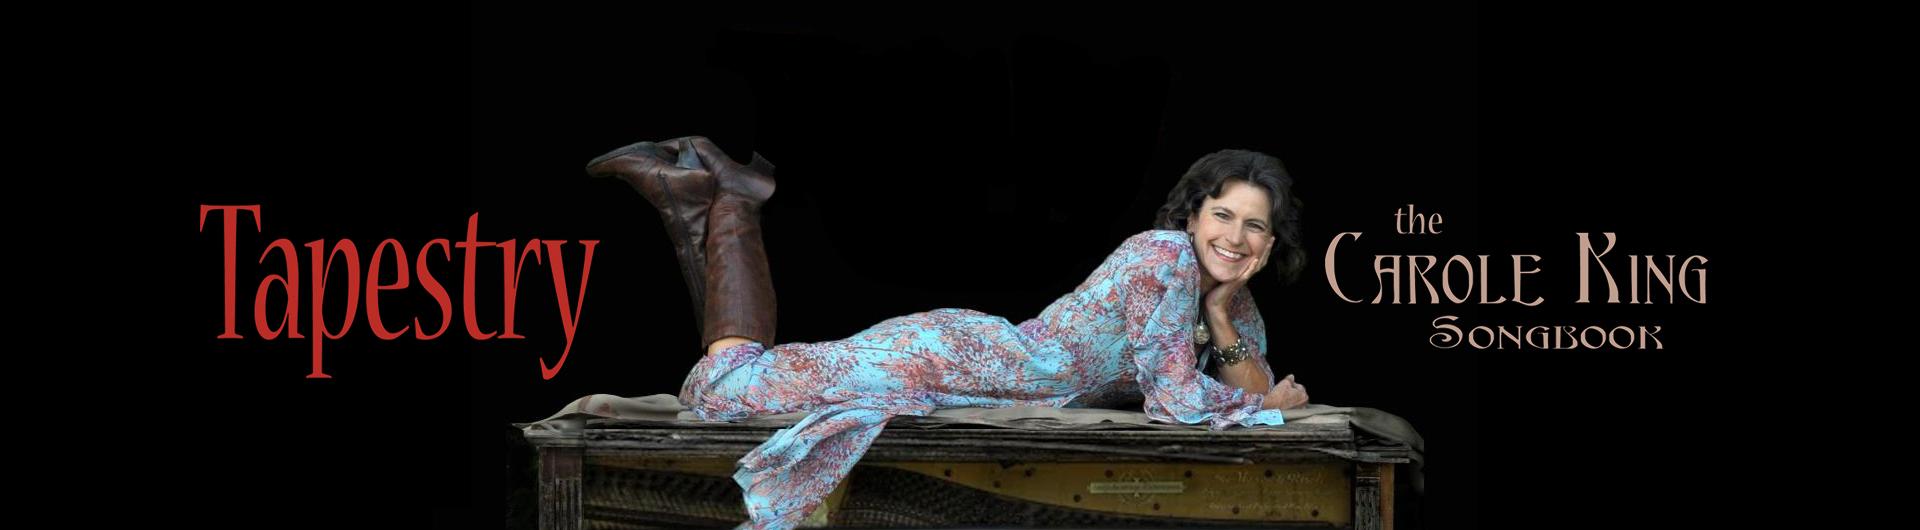 A smiling Suzanne O Davis lies face down on top of an upright piano in a dress and boots. The Text around her reads: Tapestry, the Carole King Songbook